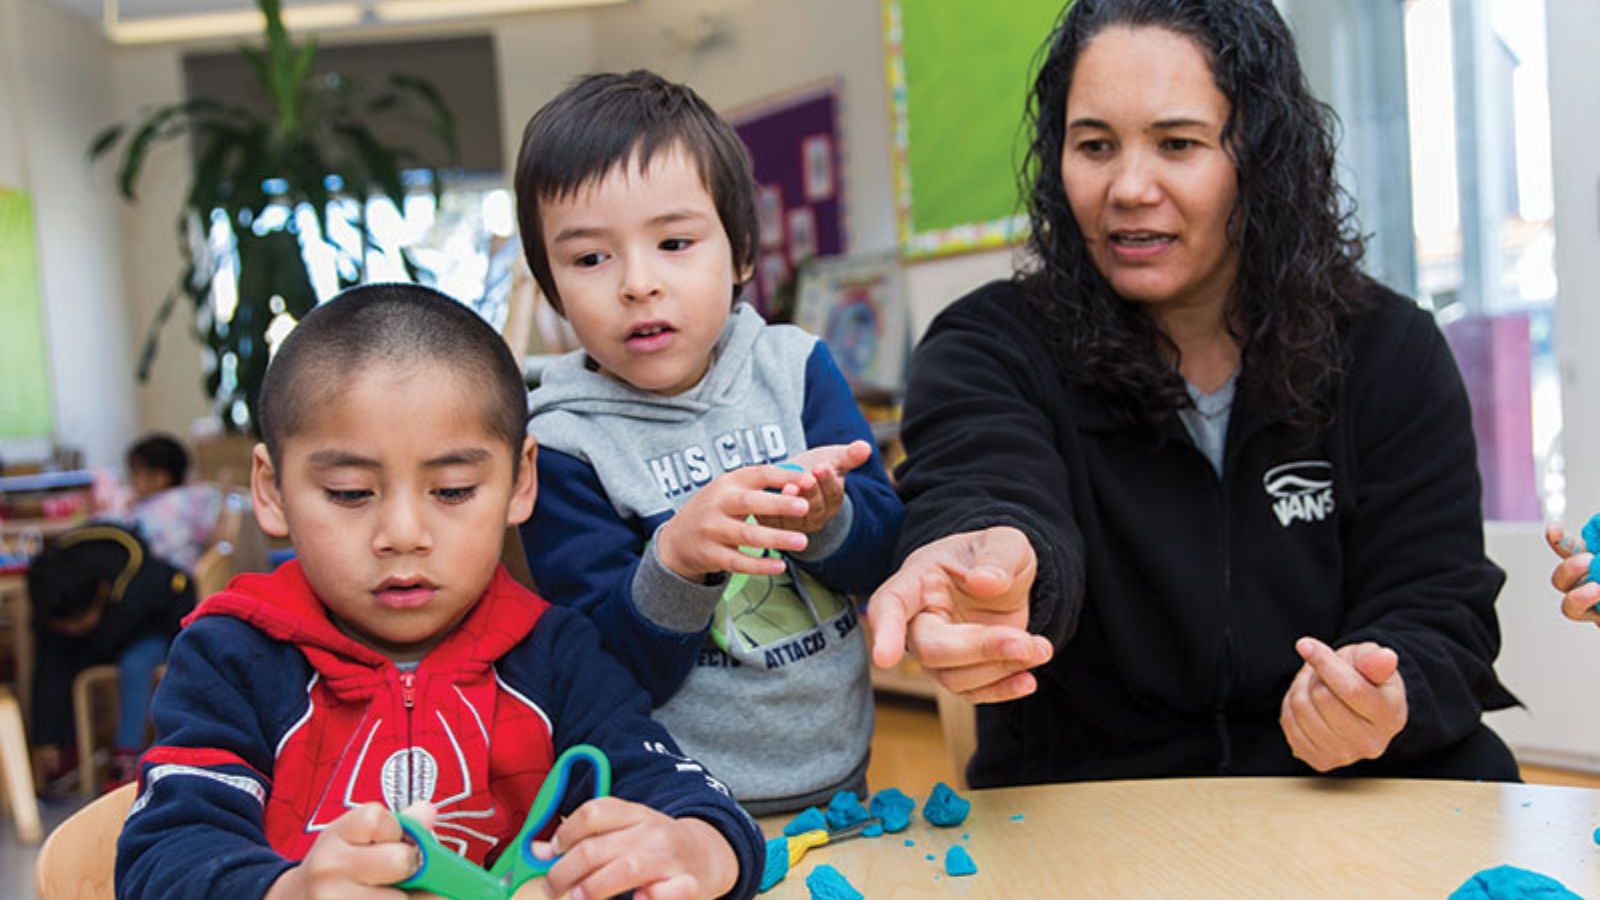 Two children and an adult play with playdough at a table in a classroom.